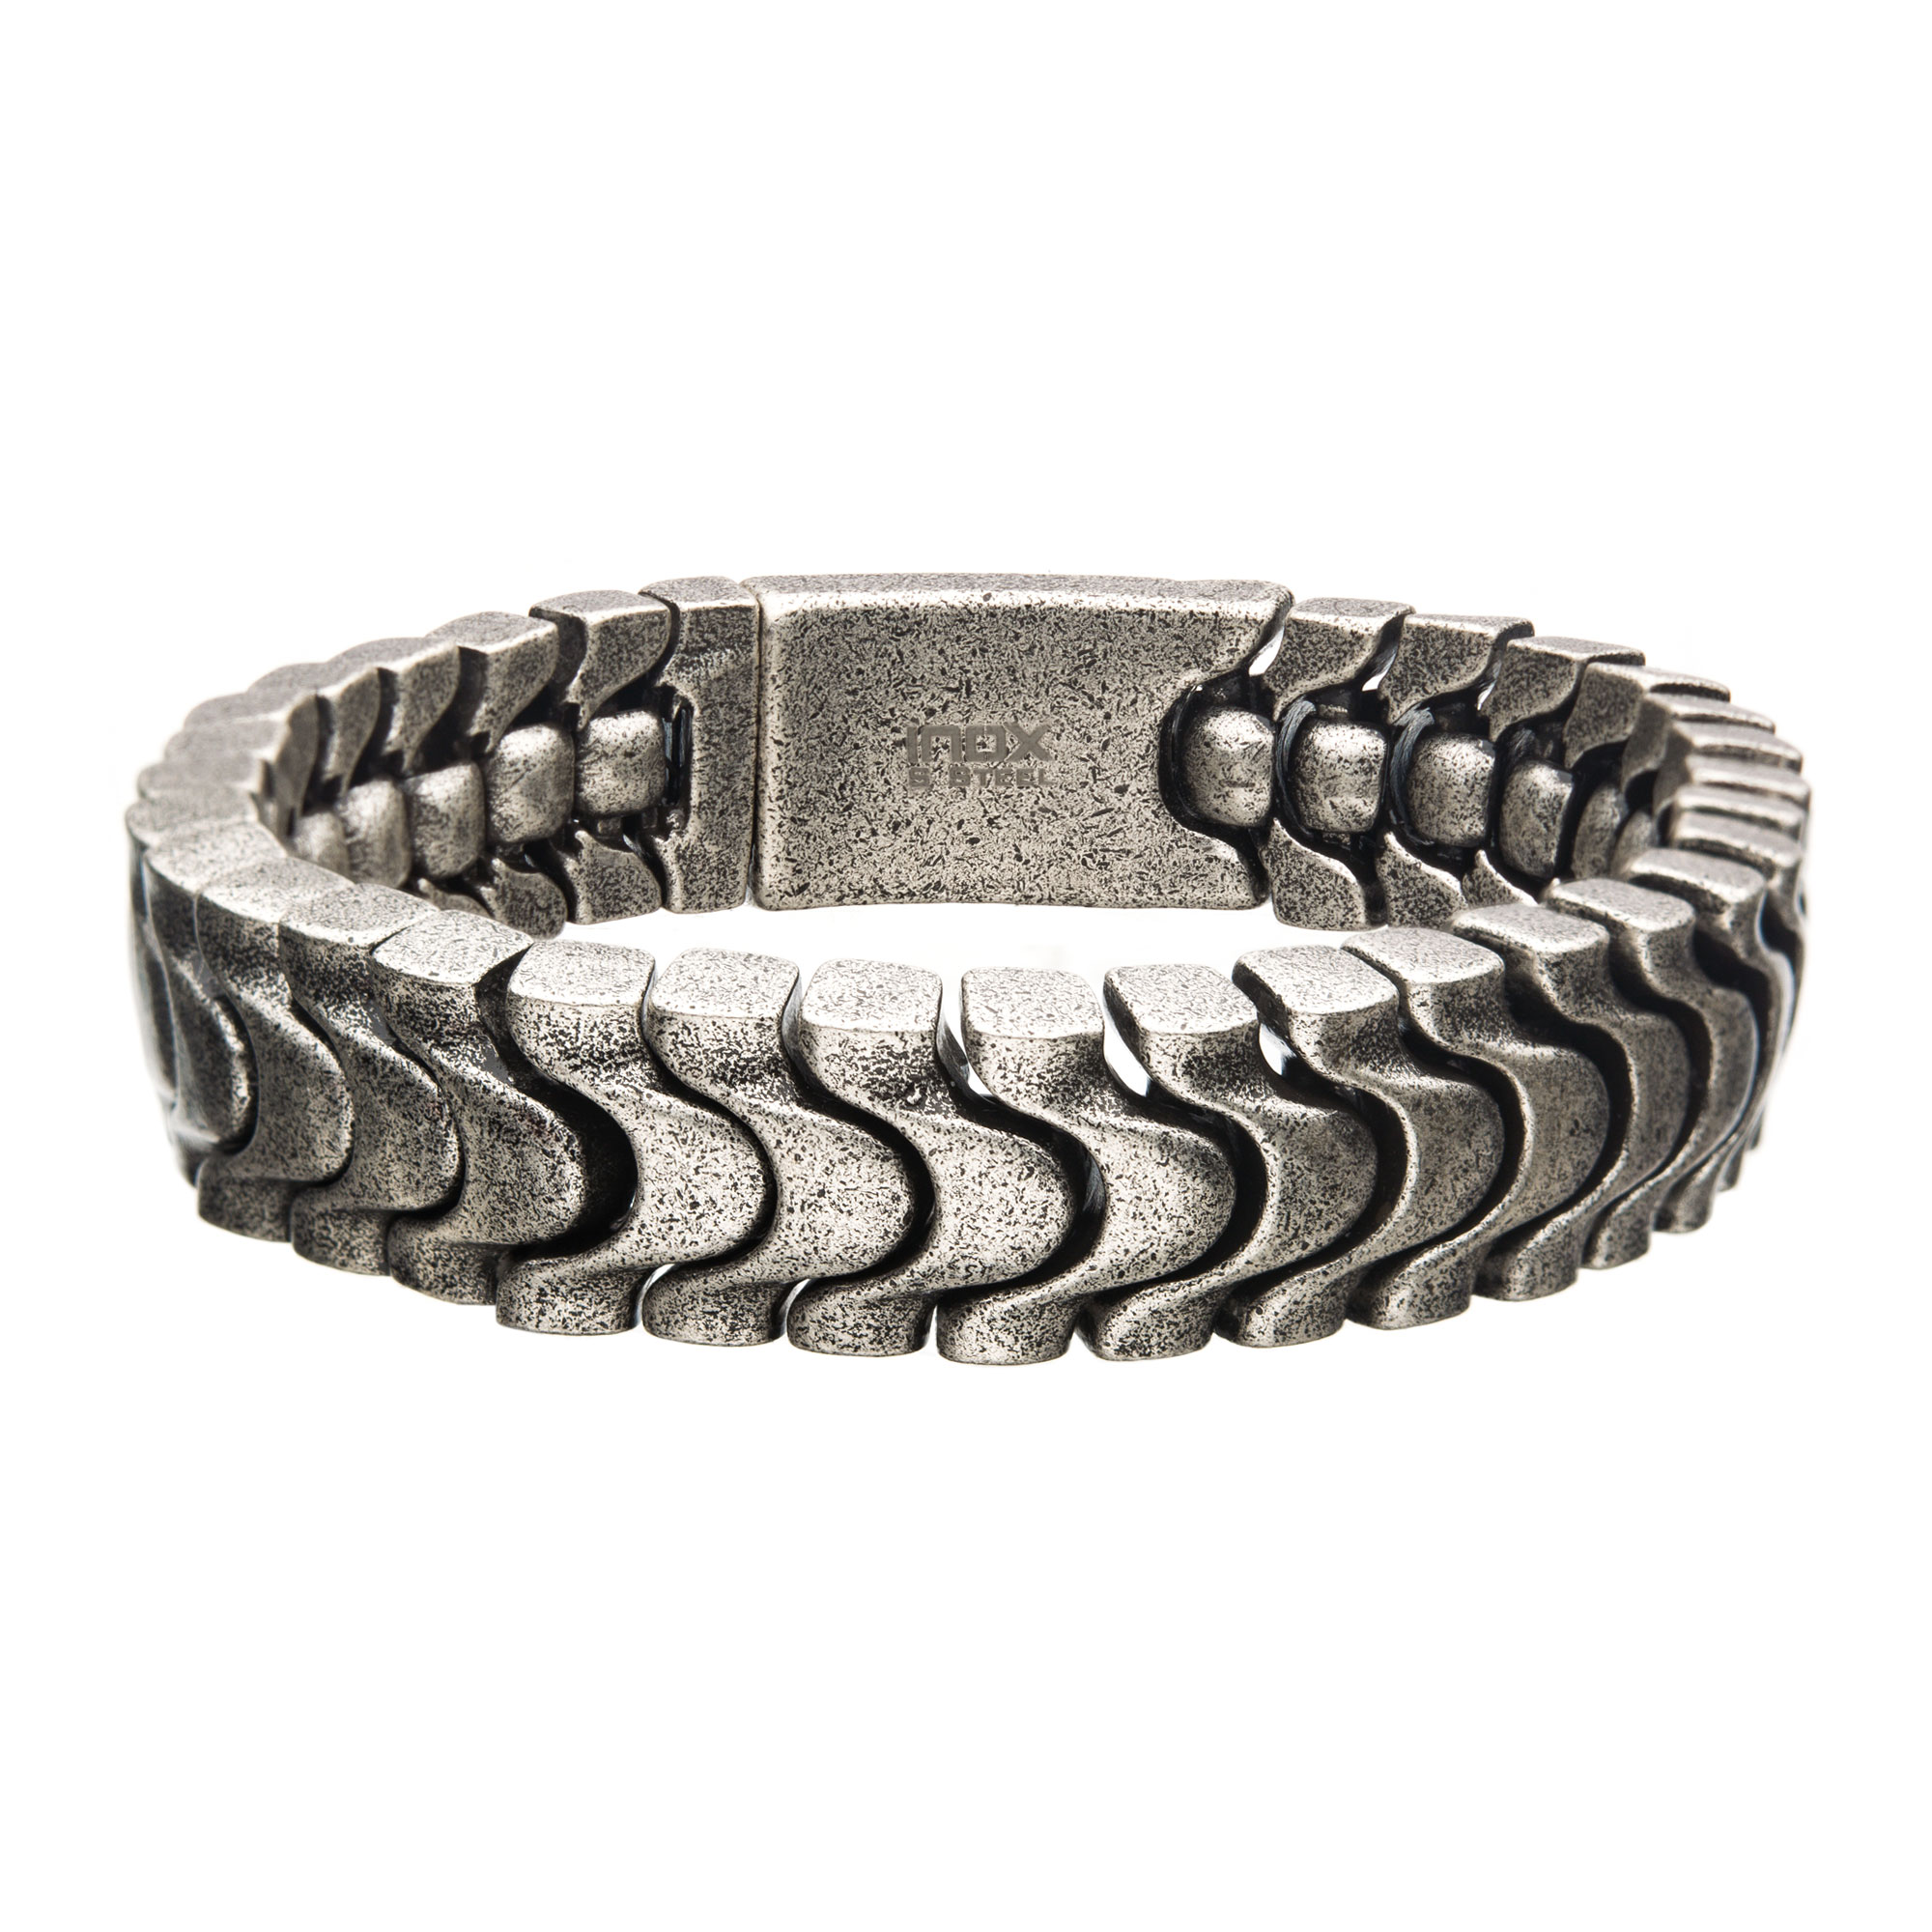 Antiqued Stainless Steel Armor Link Bracelet Spath Jewelers Bartow, FL